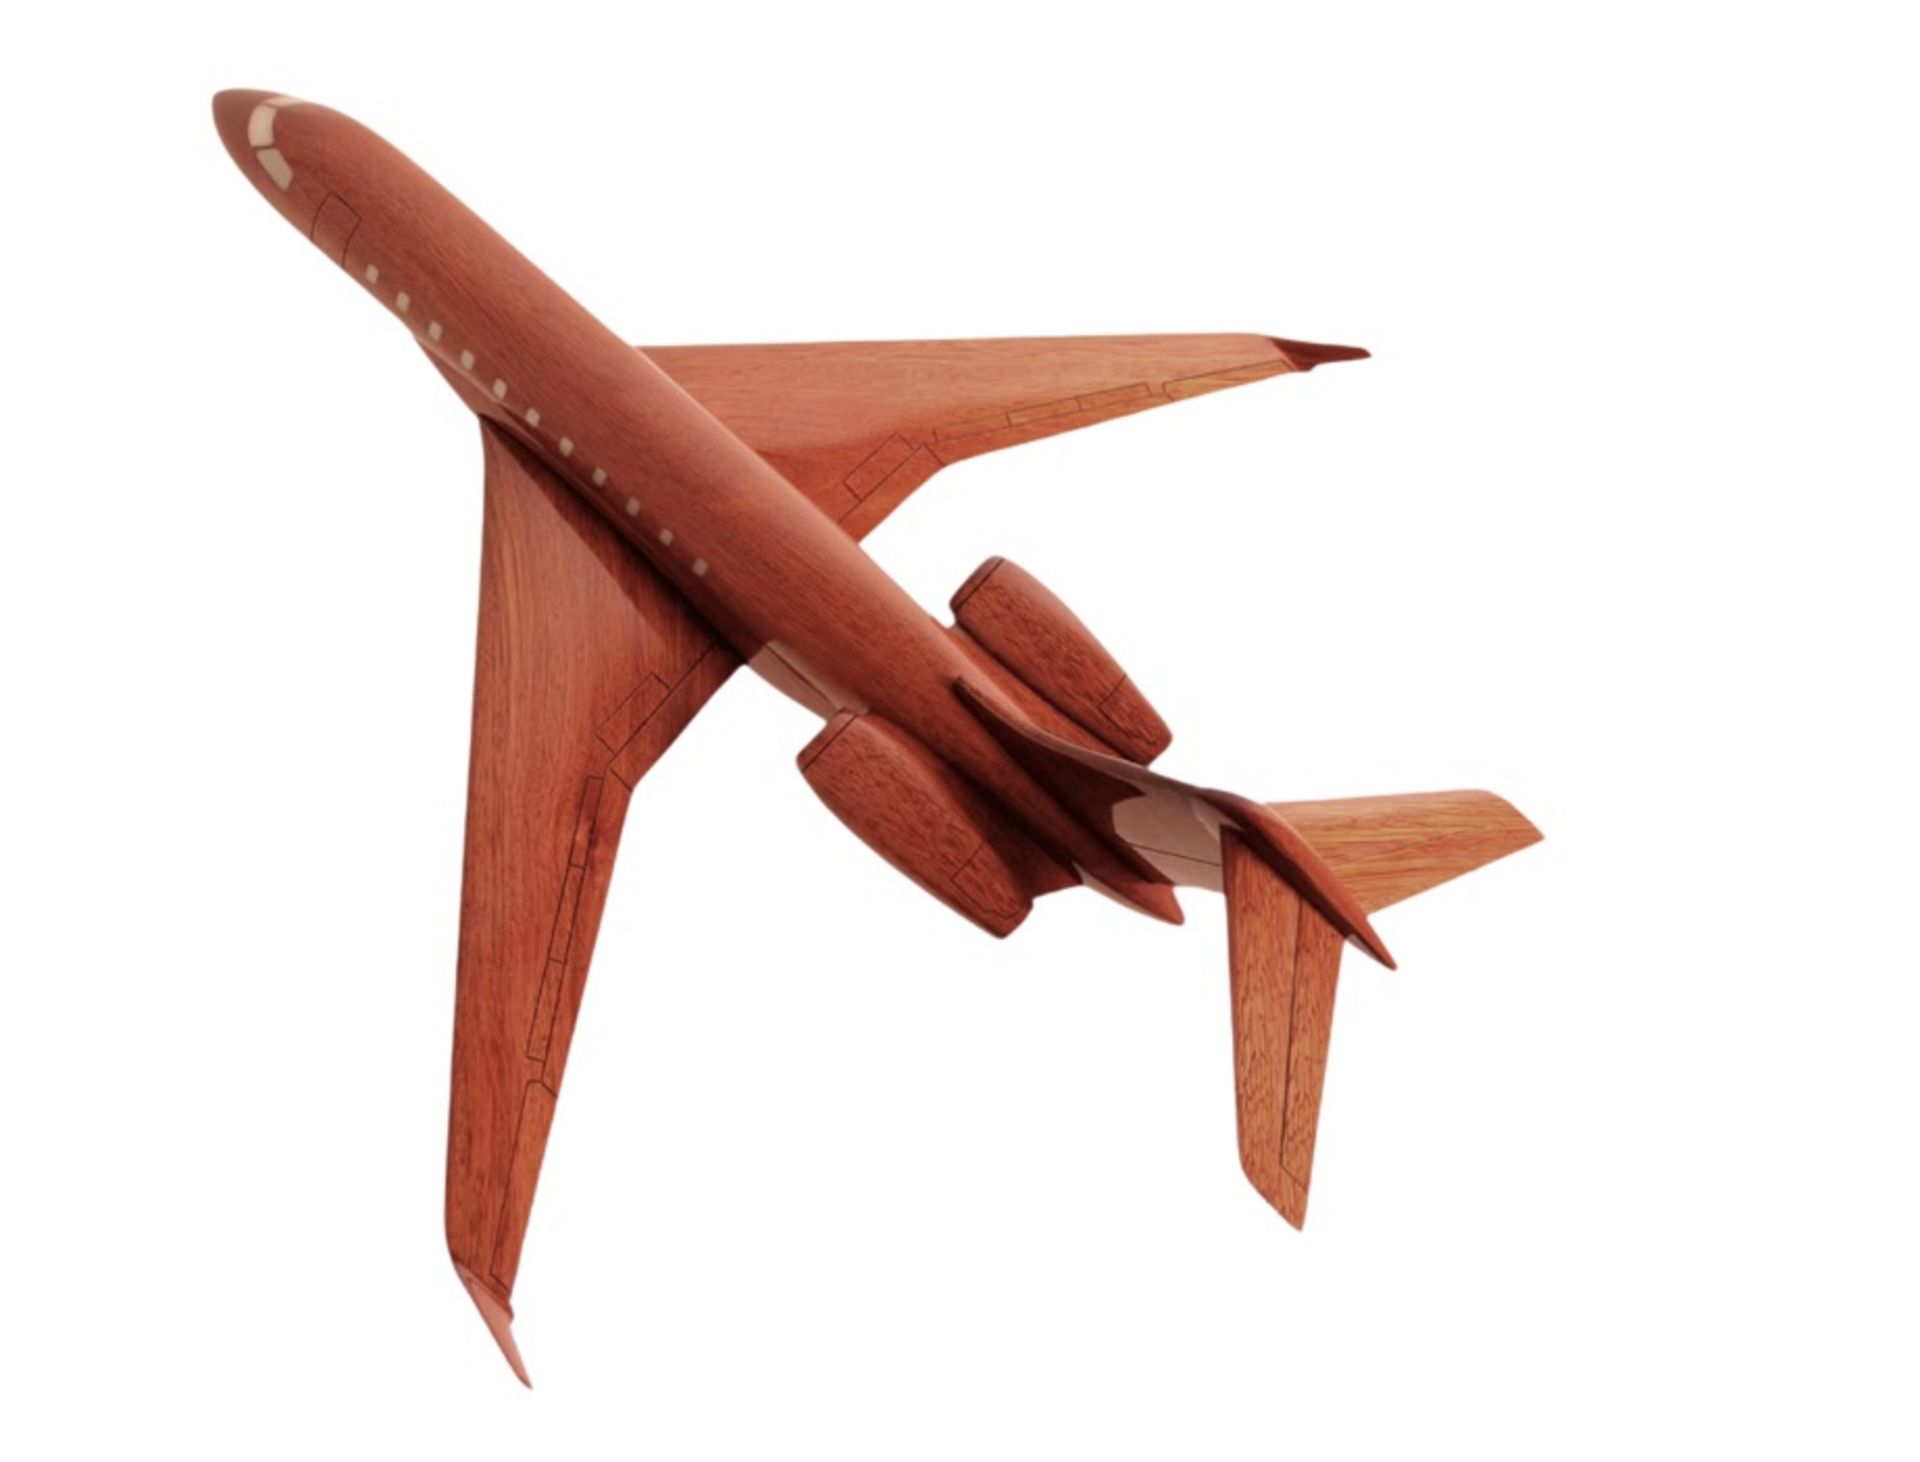 Bombardier Global 8500 Wooden Scale Display Model - Image 3 of 7